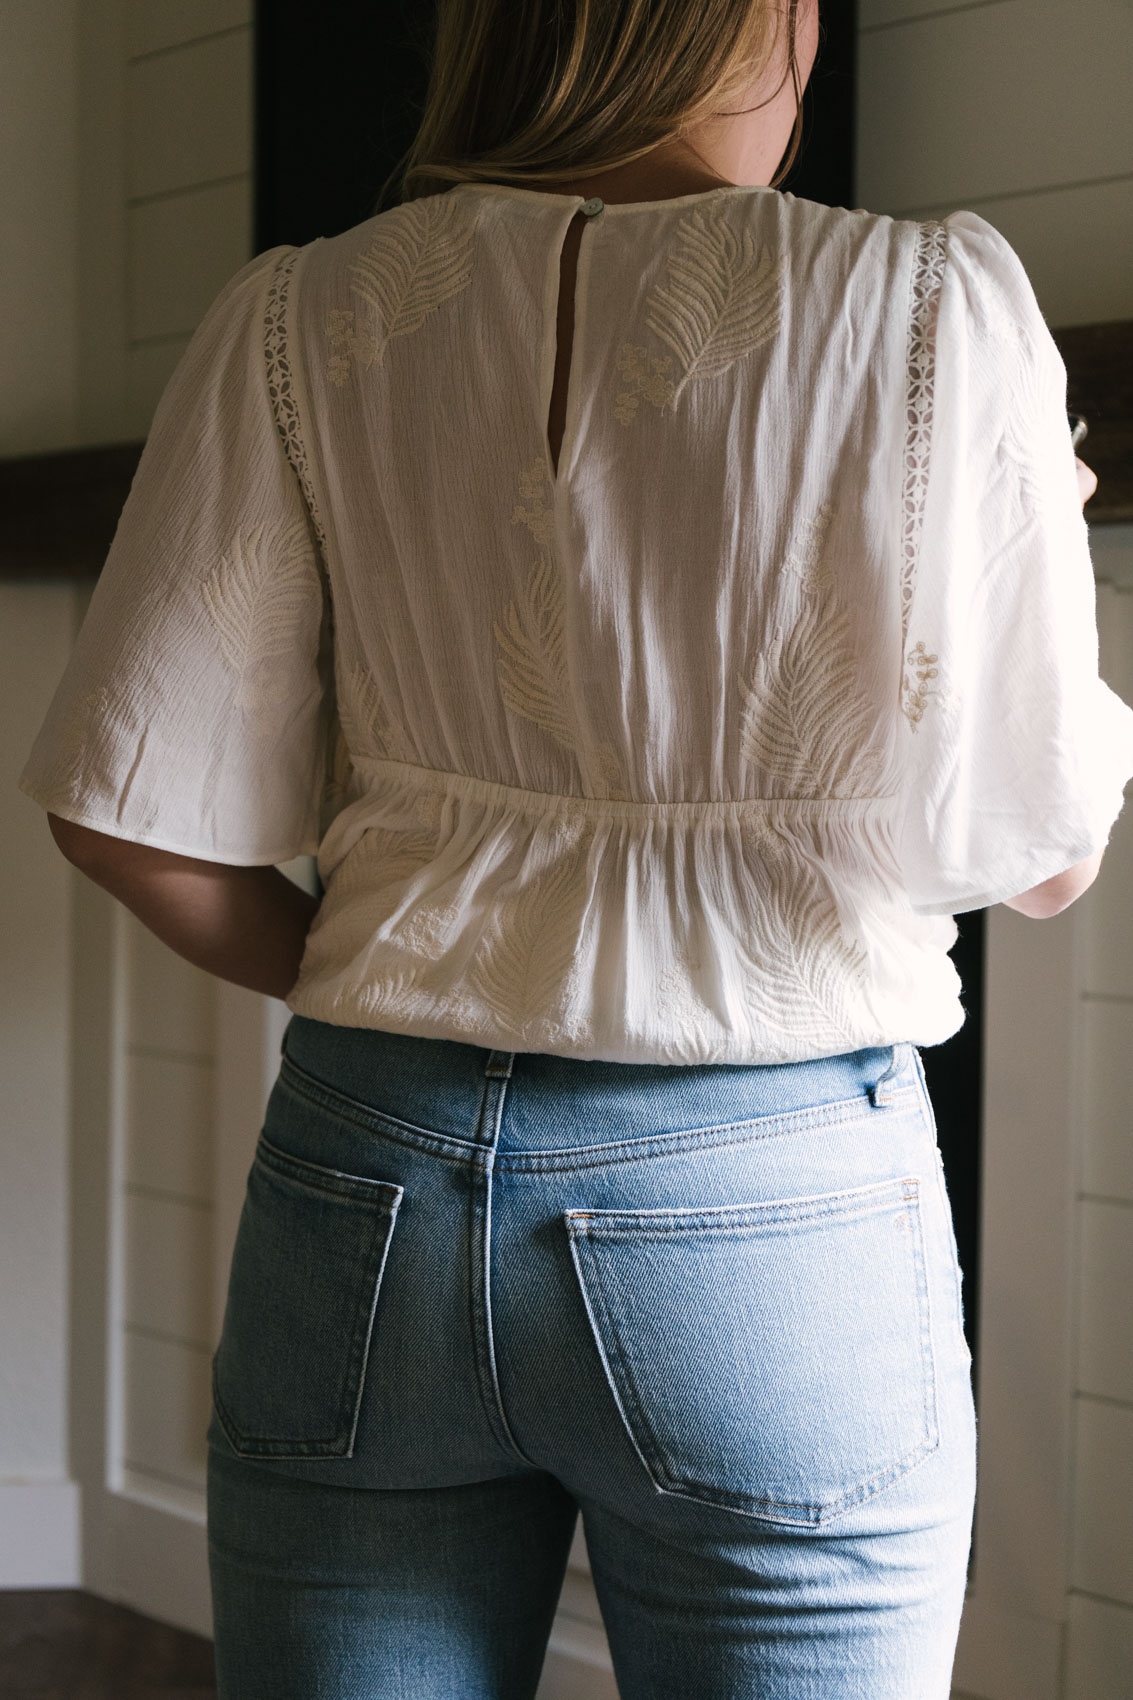 The most flattering pair of jeans I own: Madewell Perfect Vintage Jean review